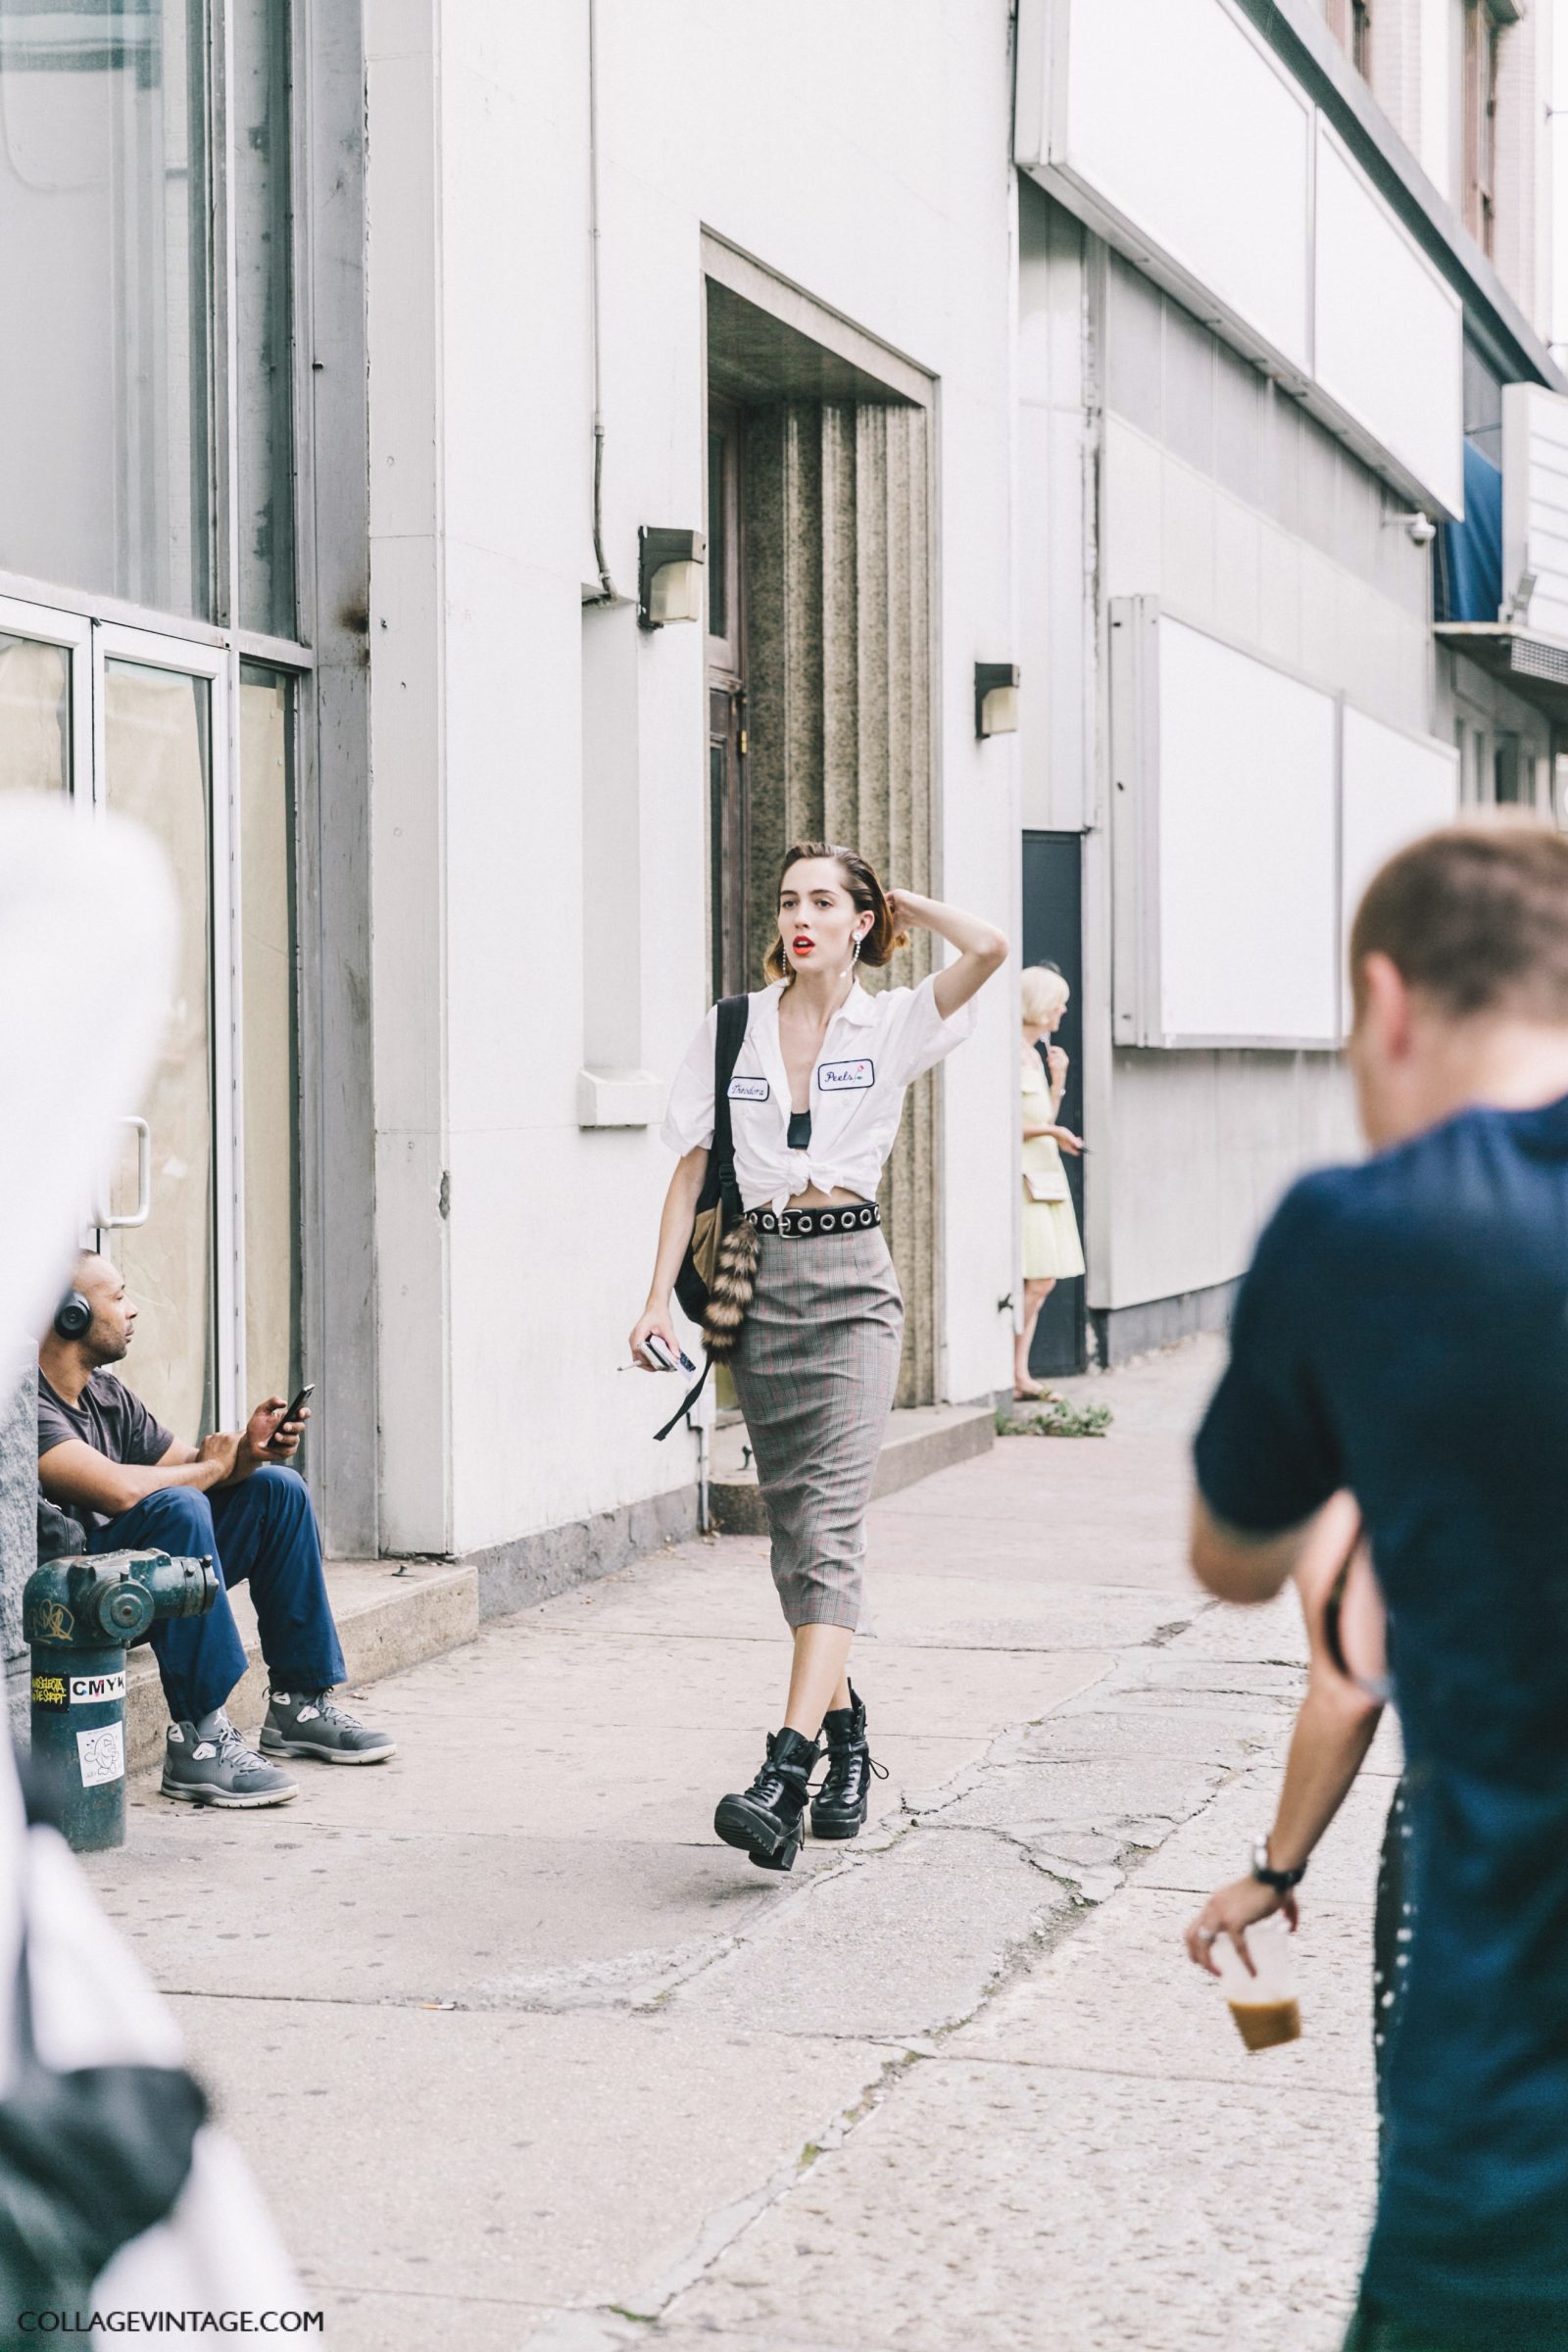 nyfw-new_york_fashion_week_ss17-street_style-outfits-collage_vintage-pencil_skirt-vintage_shrit-teddy_kweenlivan-19